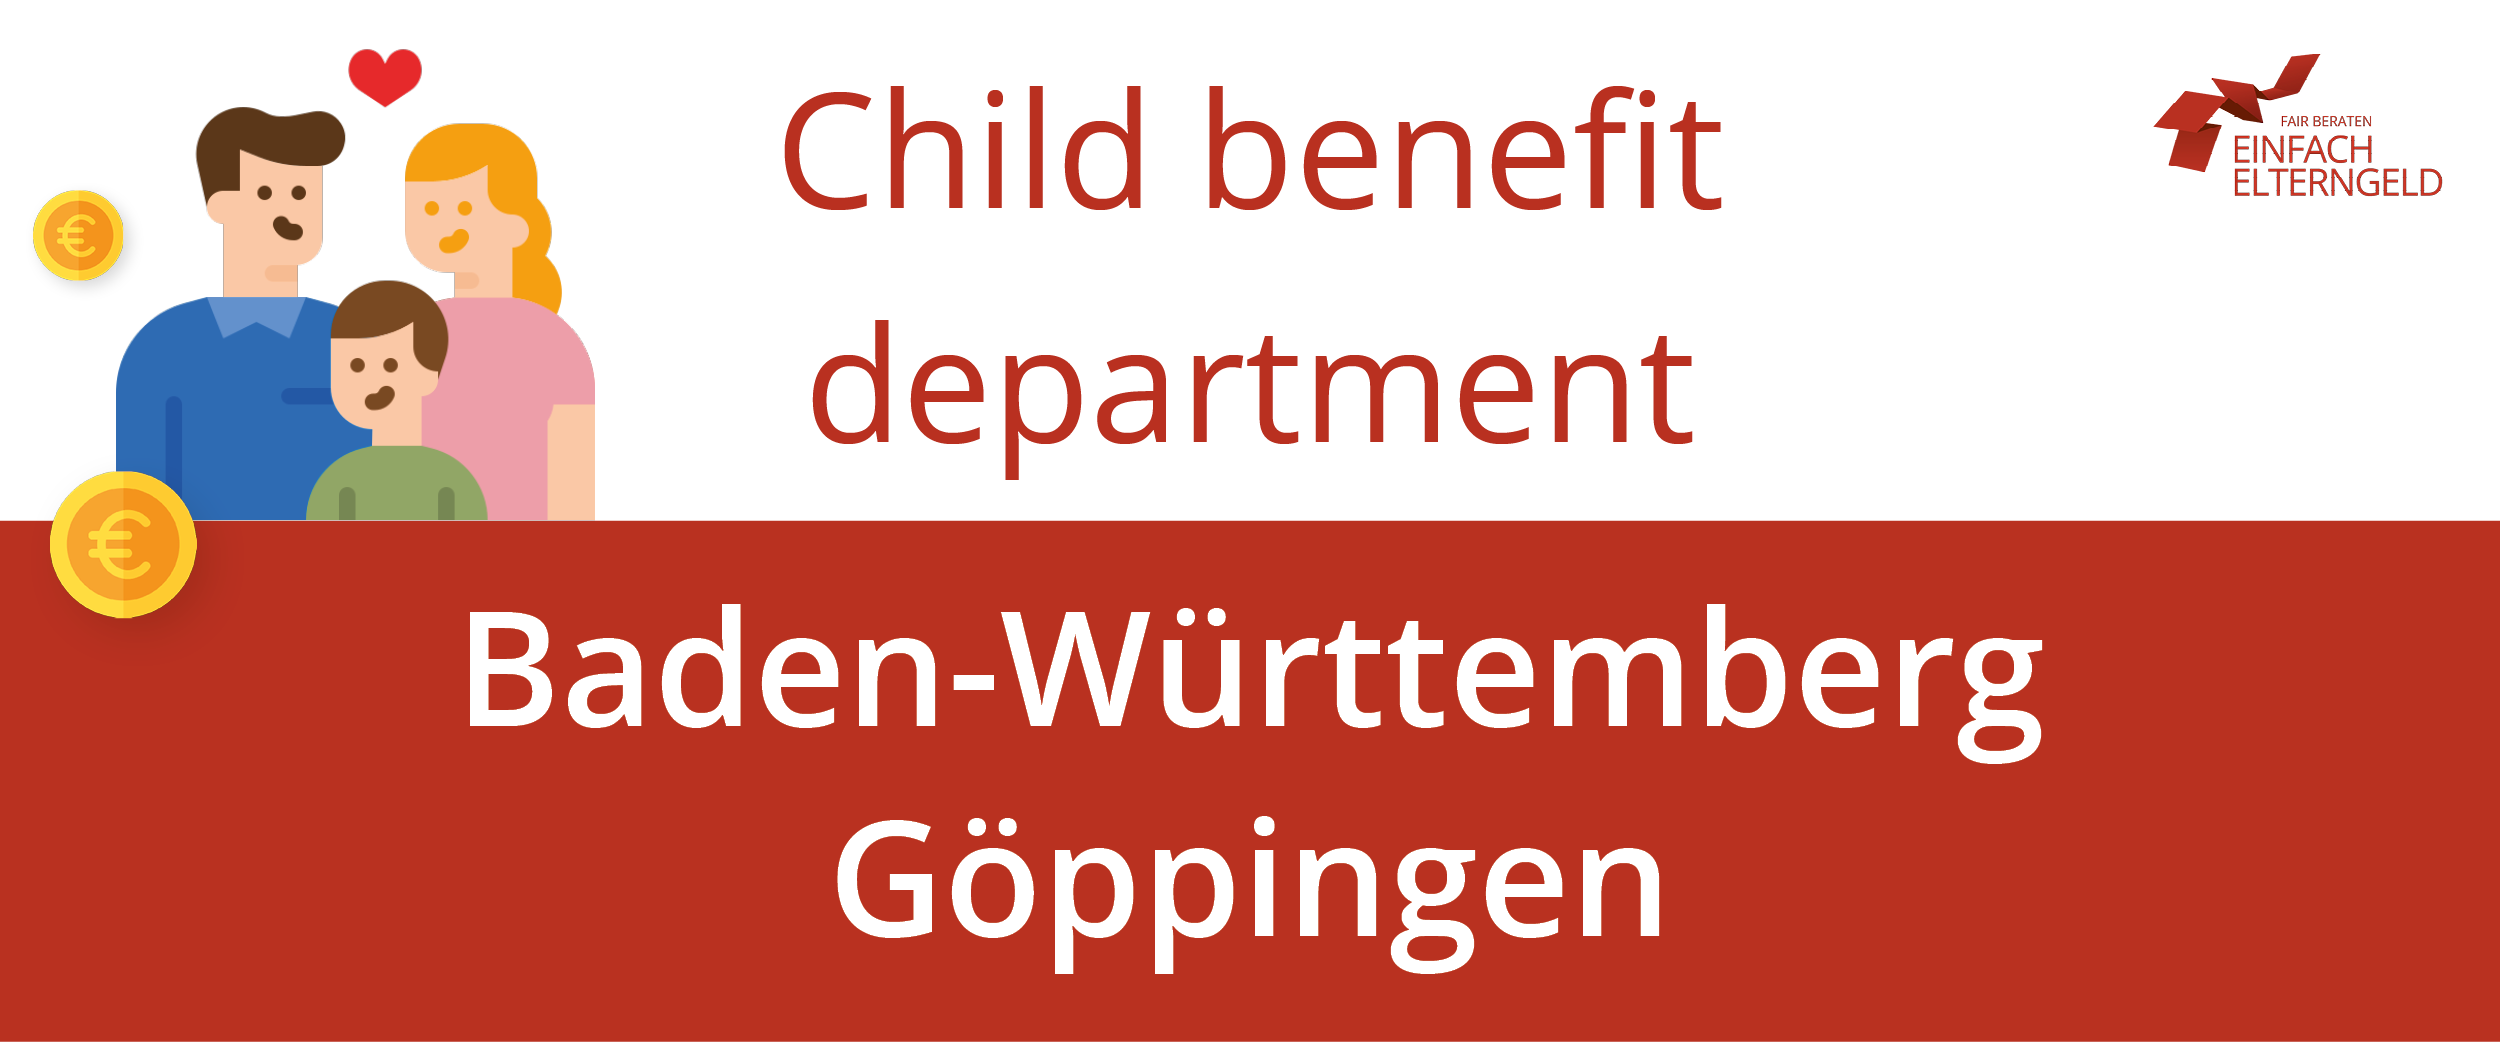 We introduce you to the Child benefit department Baden-Württemberg Göppingen.